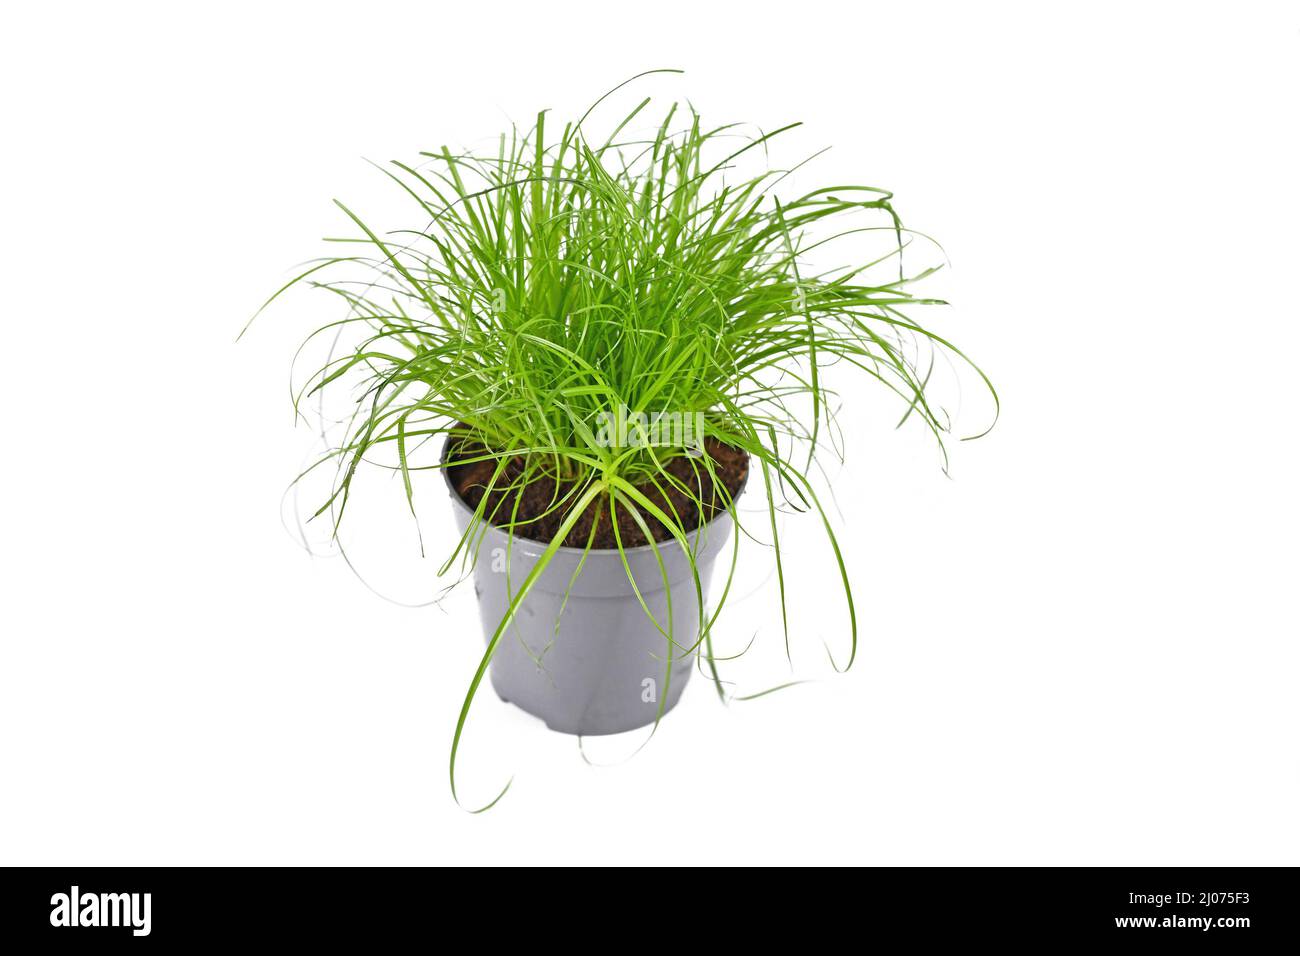 Cat grass 'Cyperus Zumula' used for cat to help them throw up hair balls on white background Stock Photo